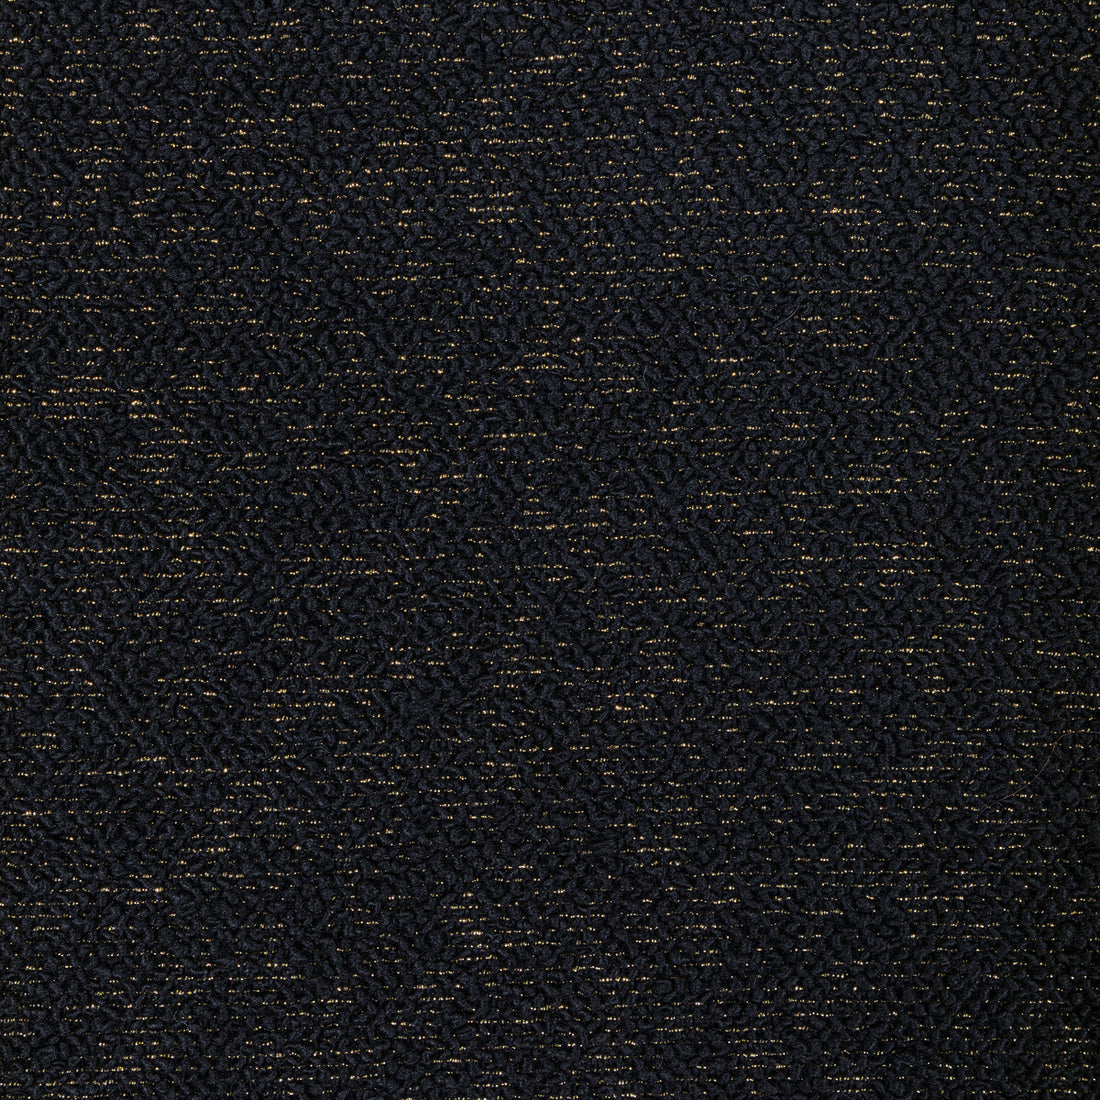 Cosmic Plush fabric in gold noir color - pattern 36329.8.0 - by Kravet Couture in the Modern Luxe III collection